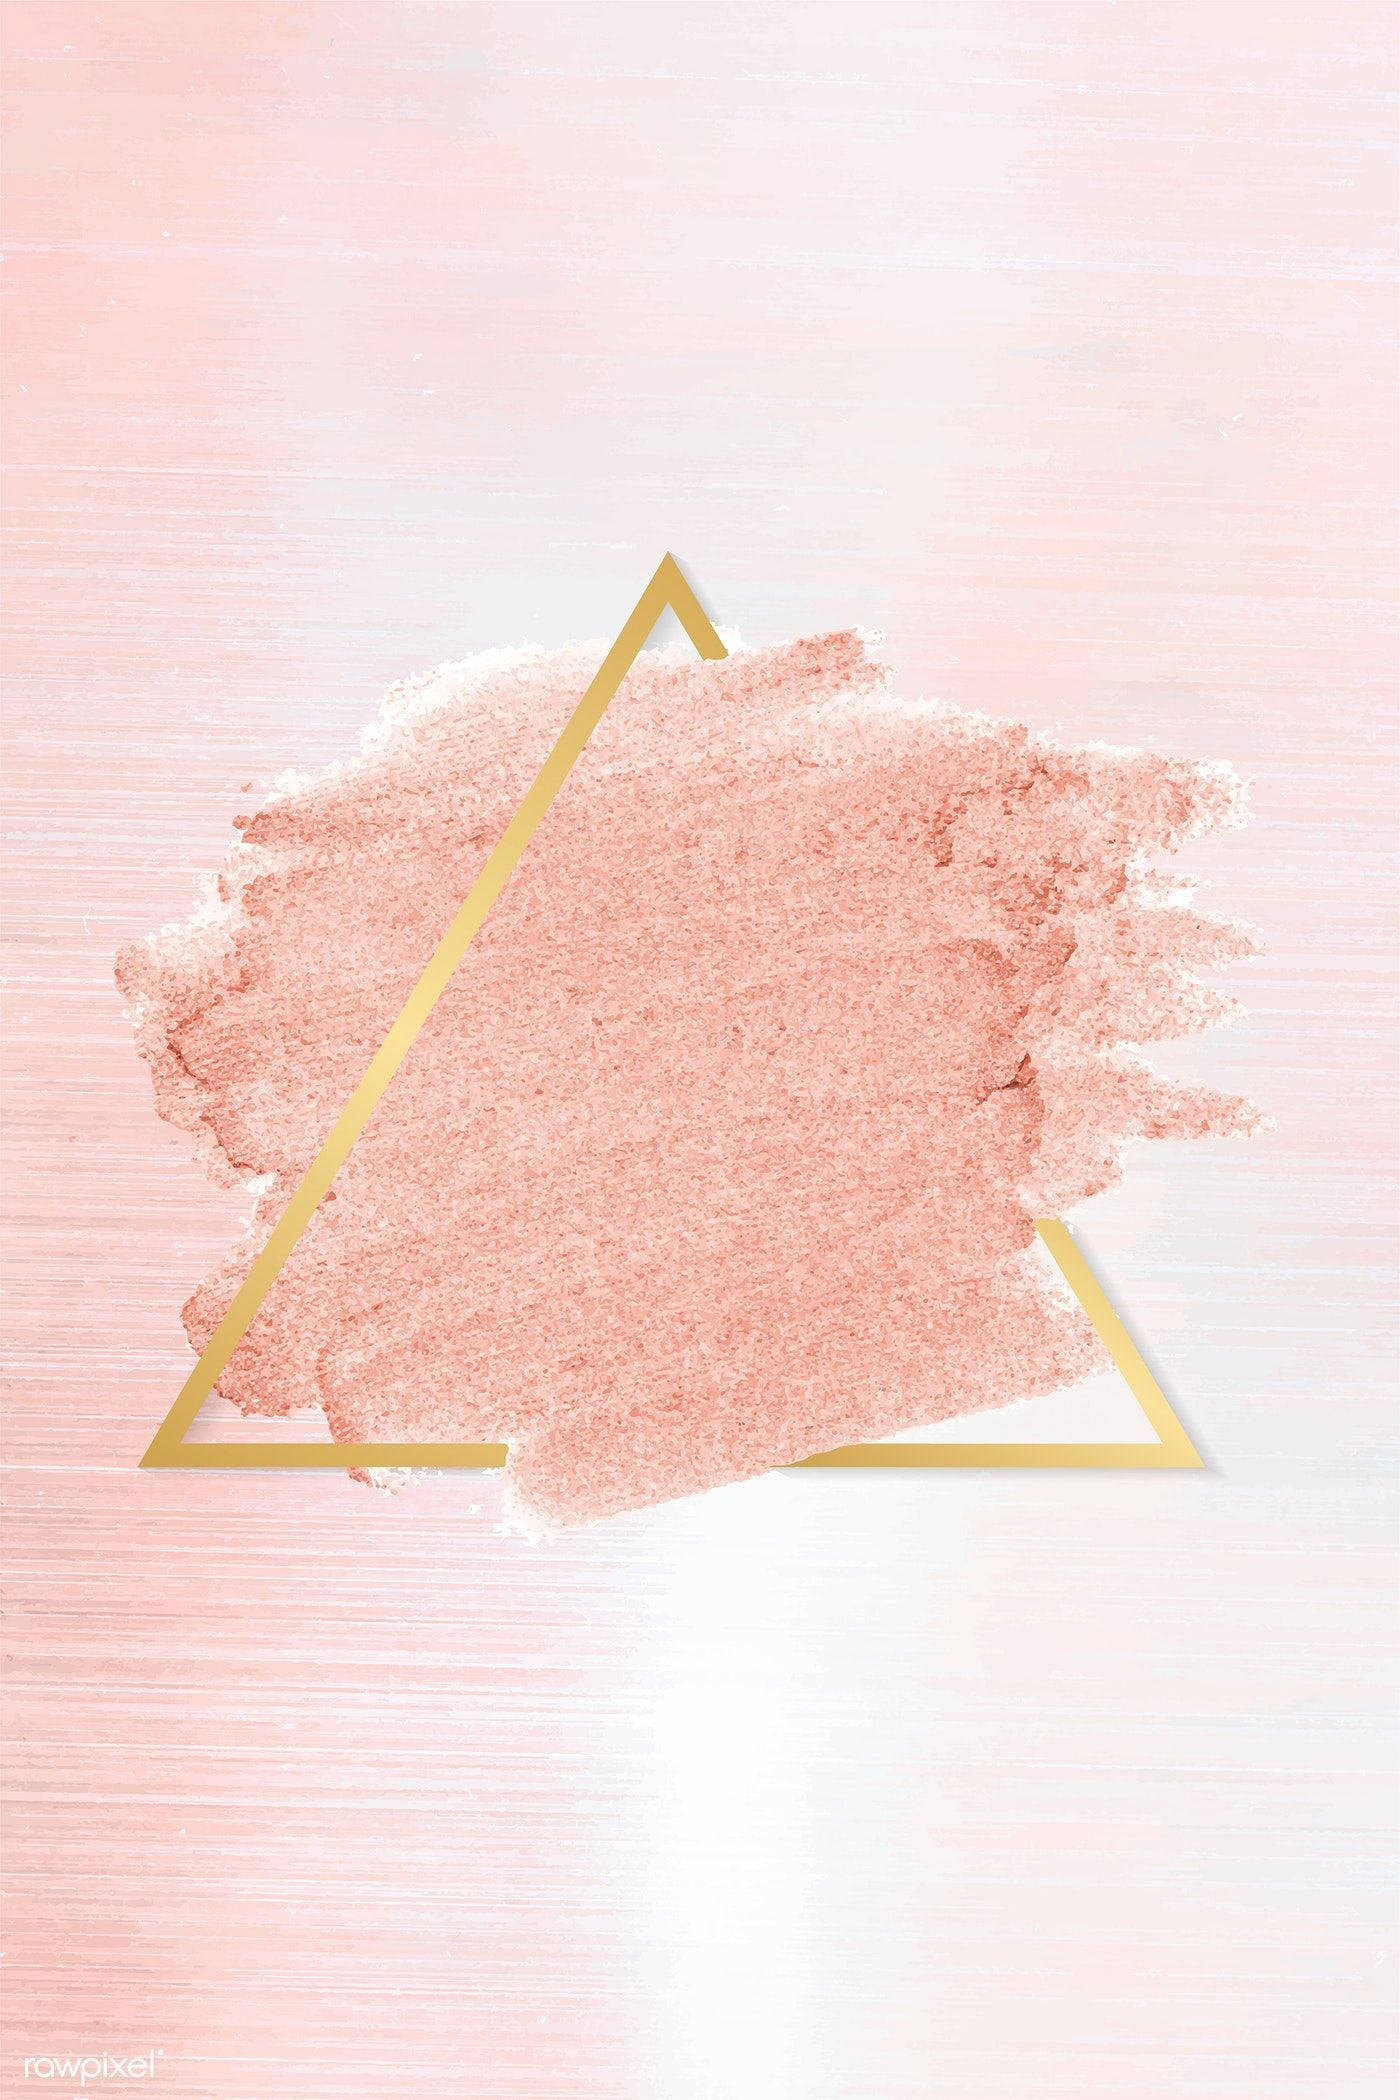 A pink and gold triangle with paint - Gold, rose gold